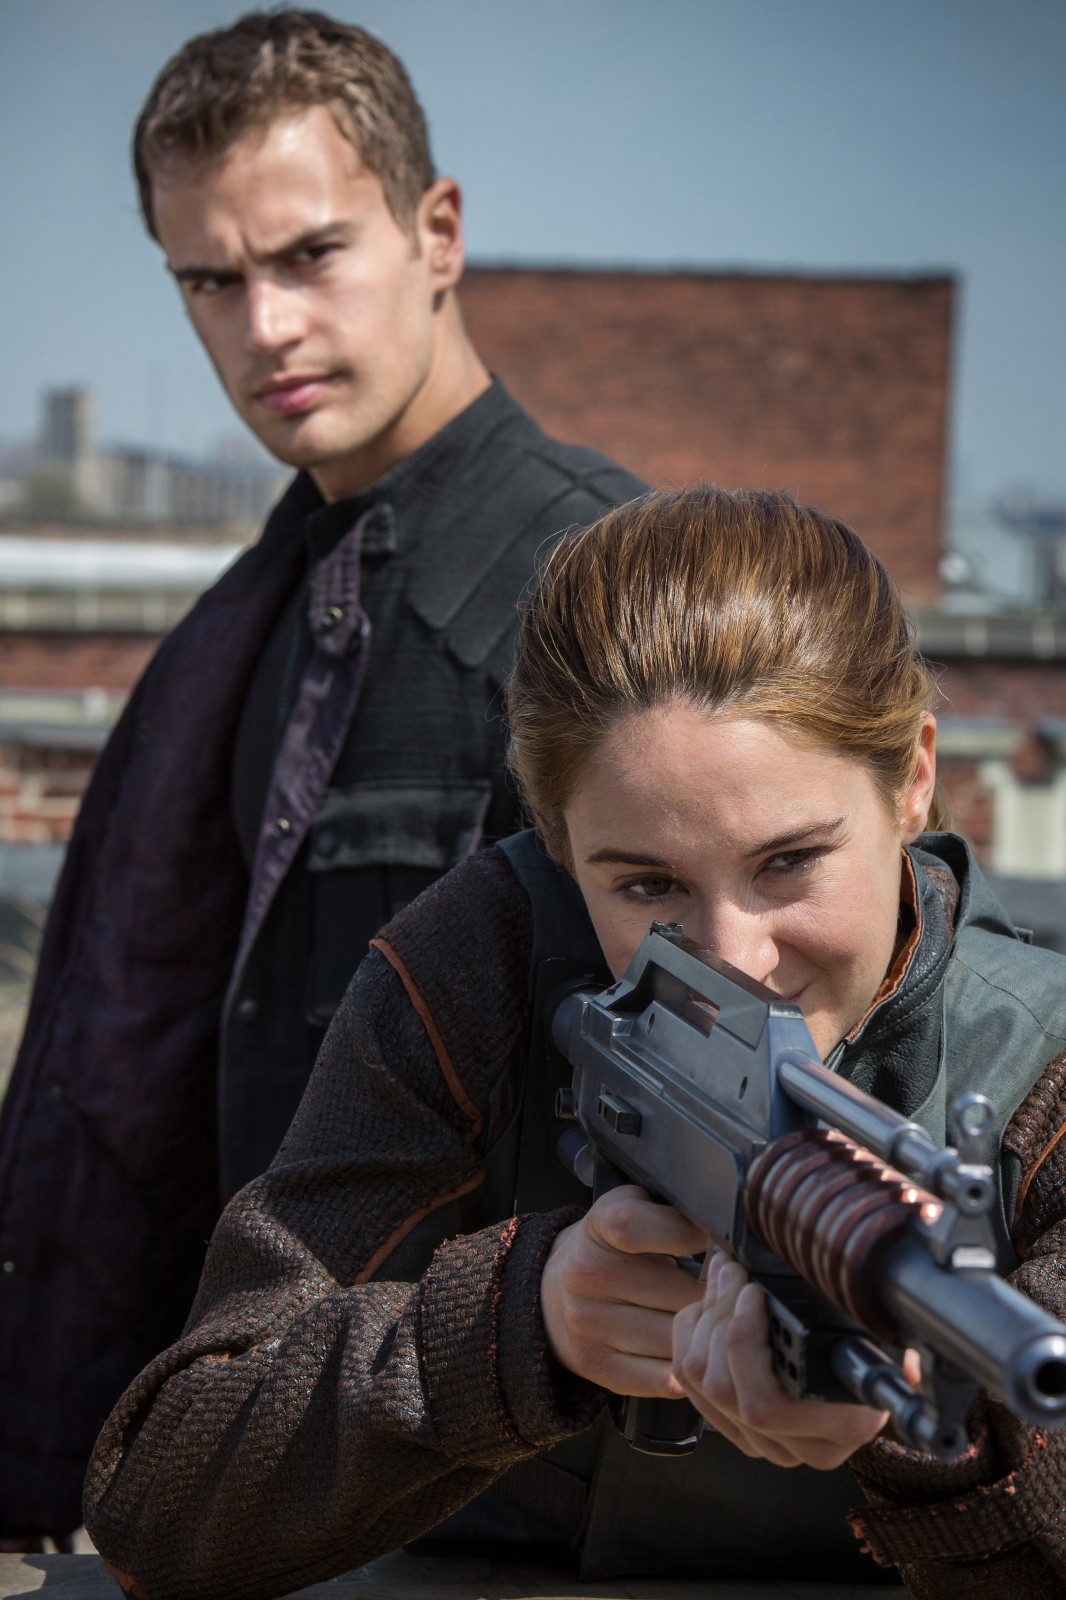 Theo James stars as Four and Shailene Woodley stars as Beatrice Prior/Tris in Summit Entertainment's Divergent (2014)